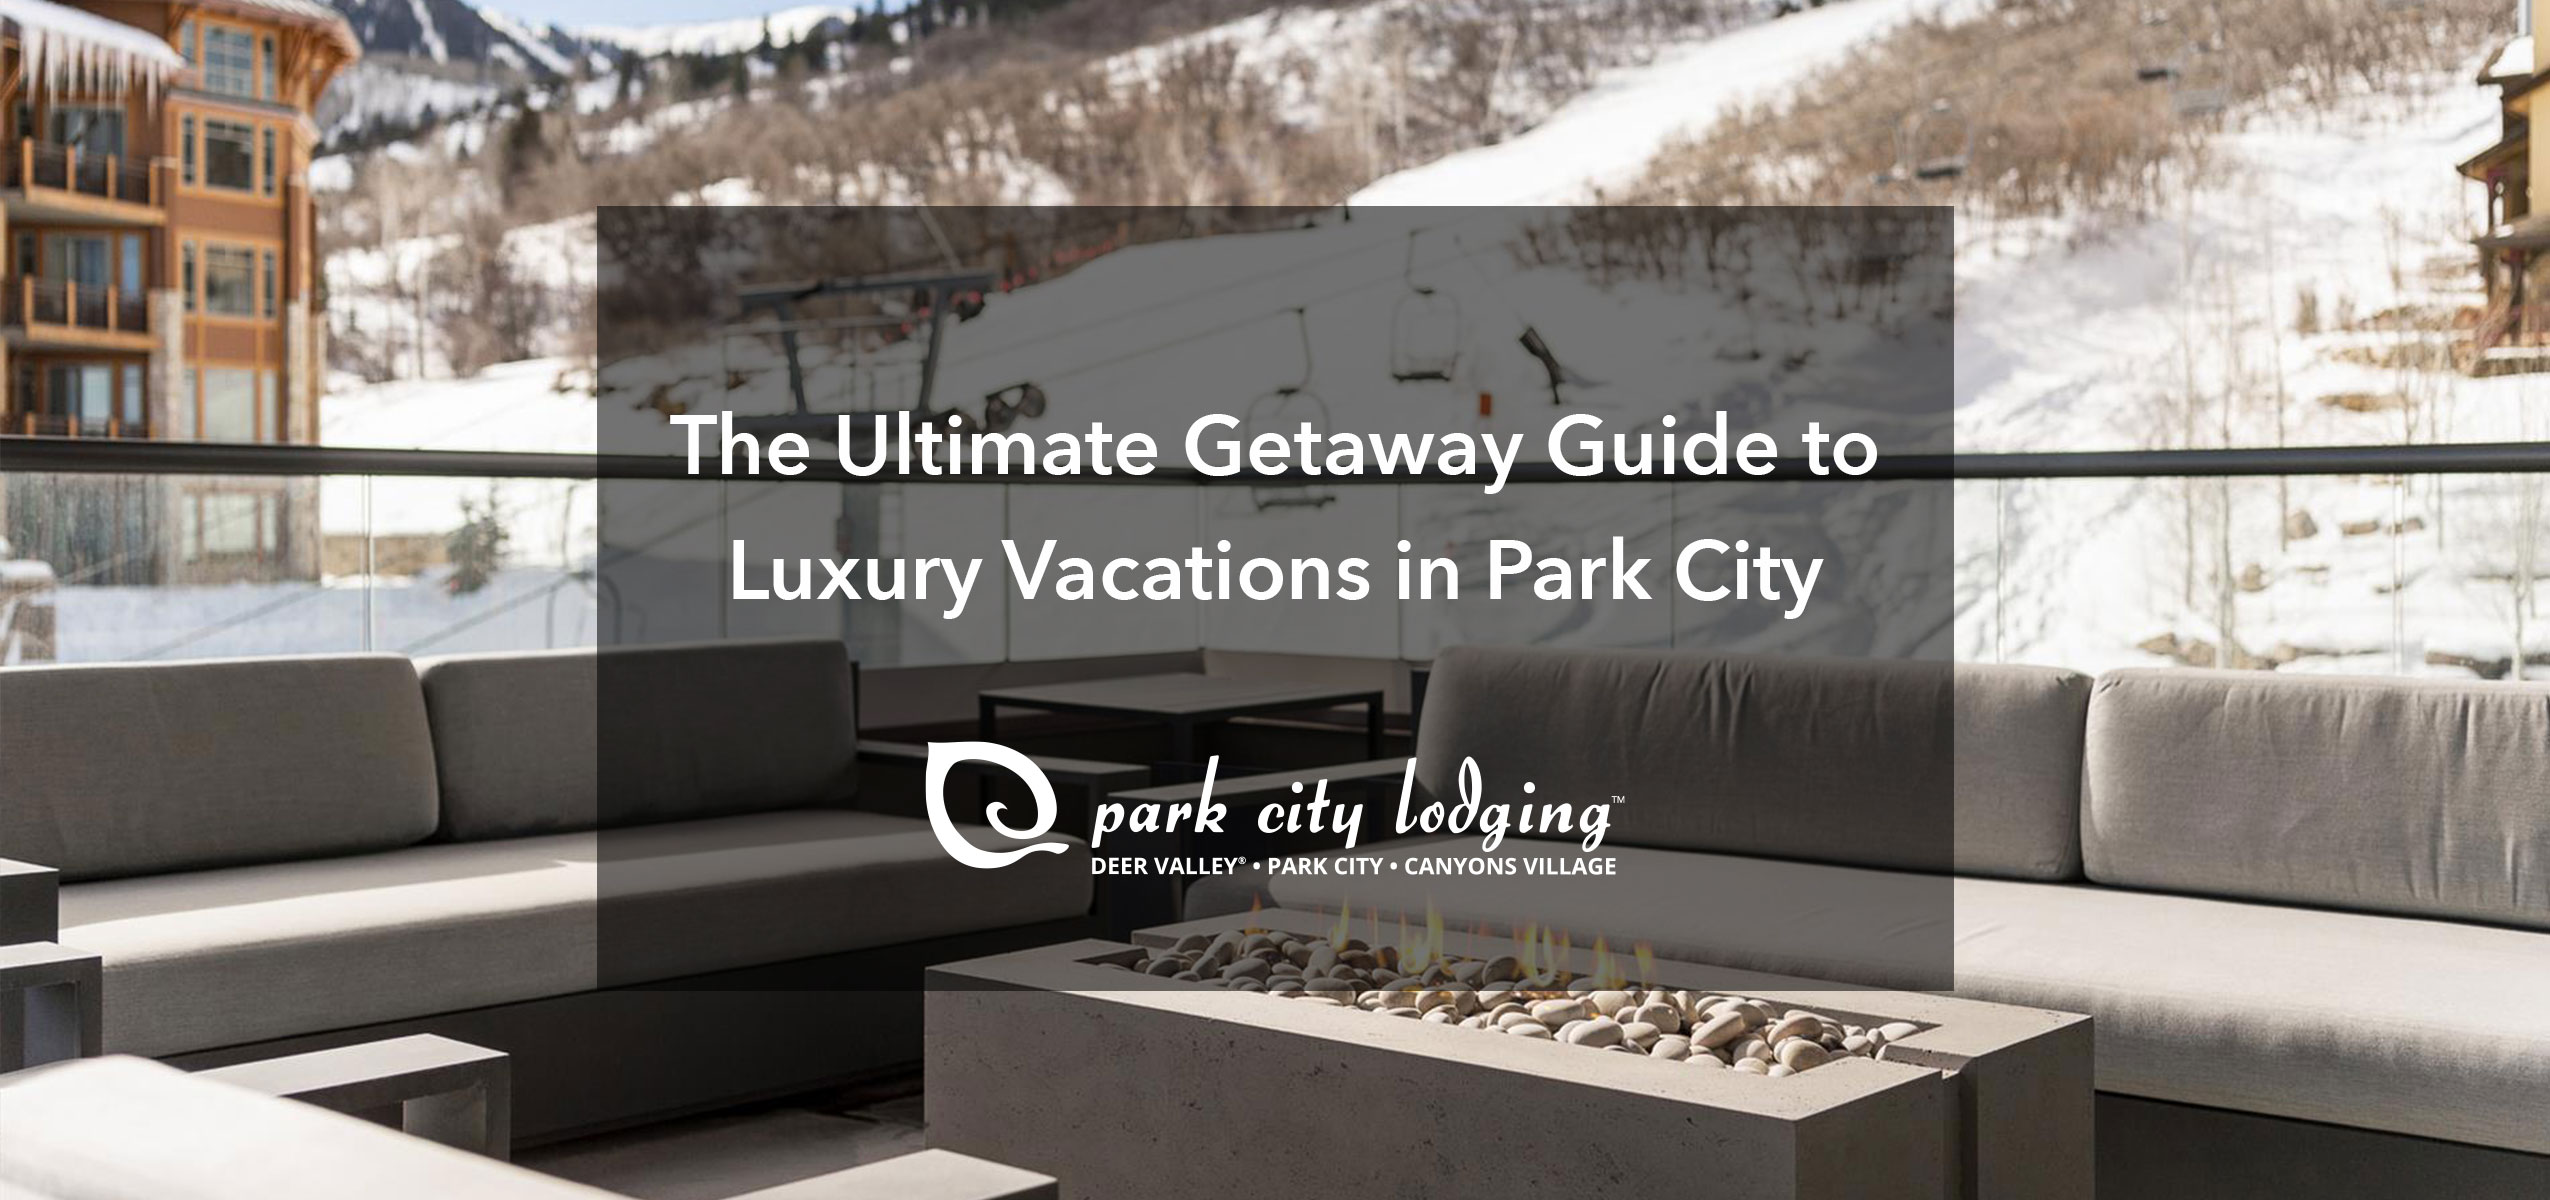 ultimate getaway guide to luxury vacations in park city